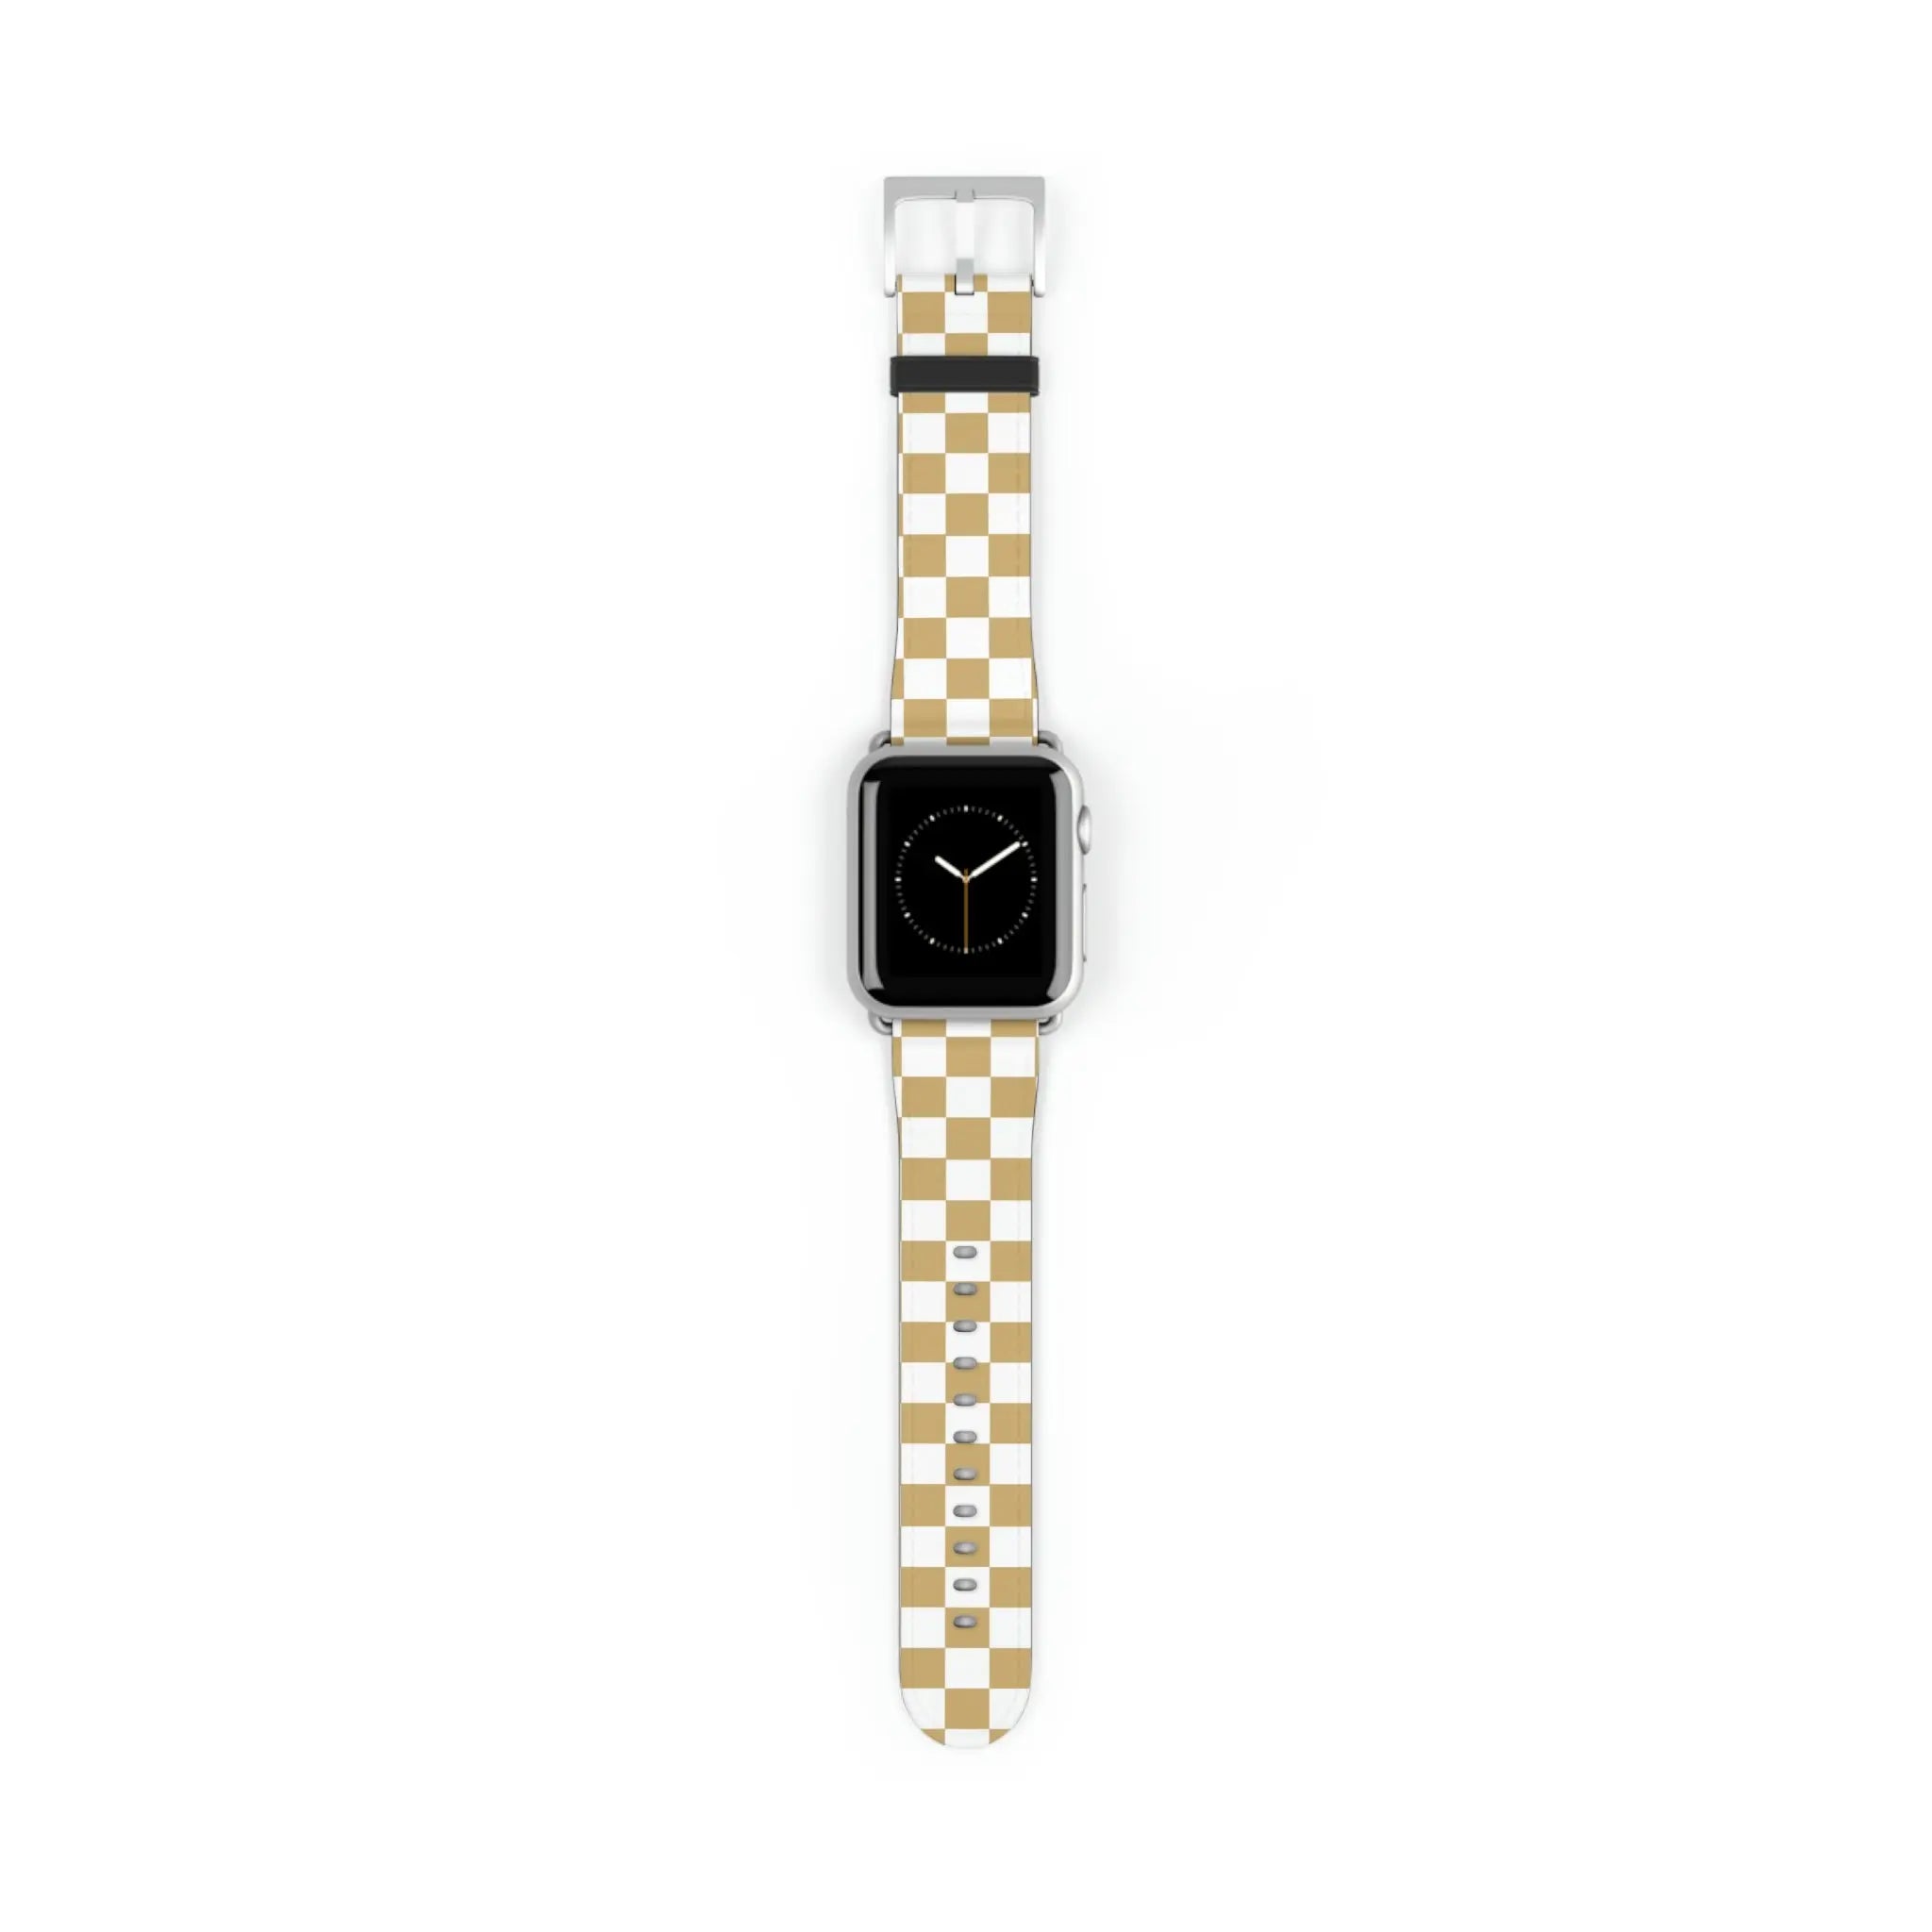  Designer Collection Check Mate (Gold) Watch Band for Apple Watch Accessories38-41mmSilverMatte